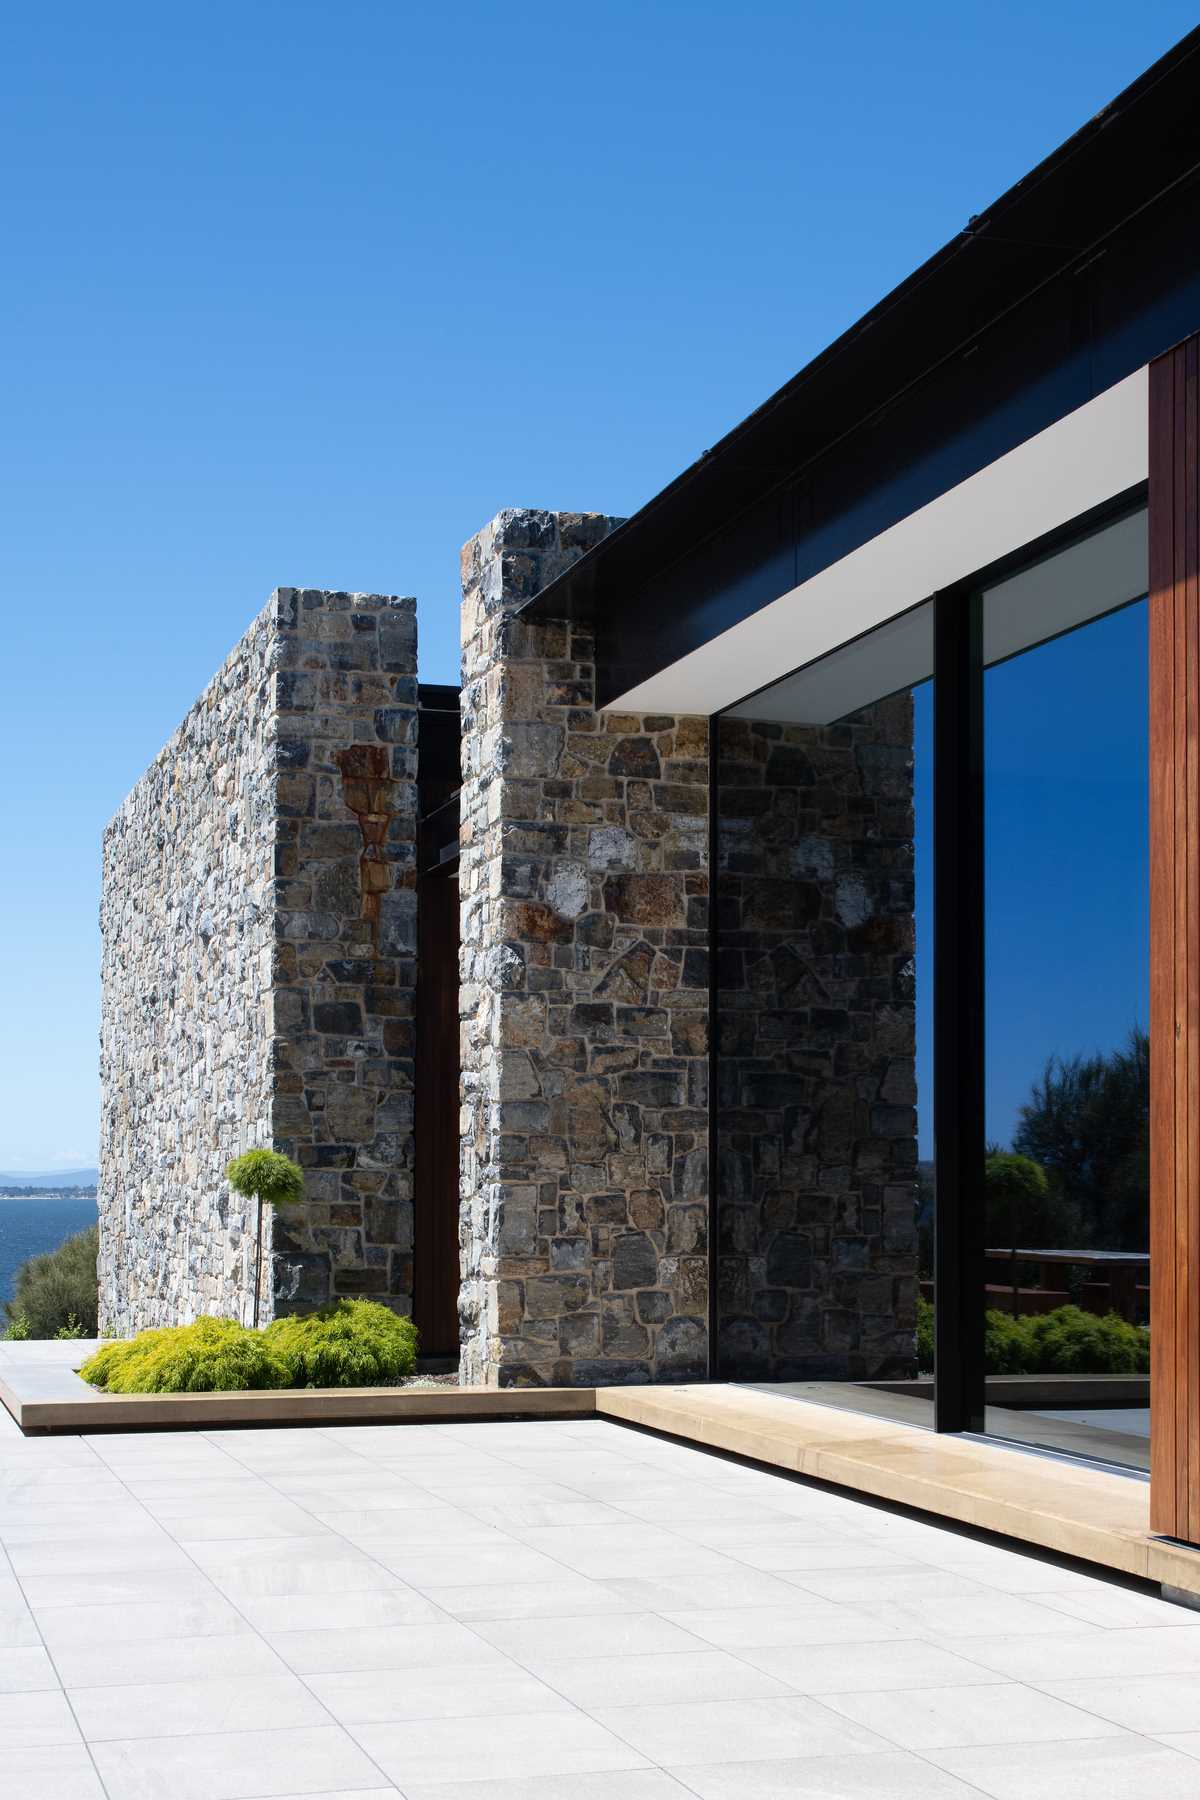 A modern house with stone walls, and wood and black steel accents.